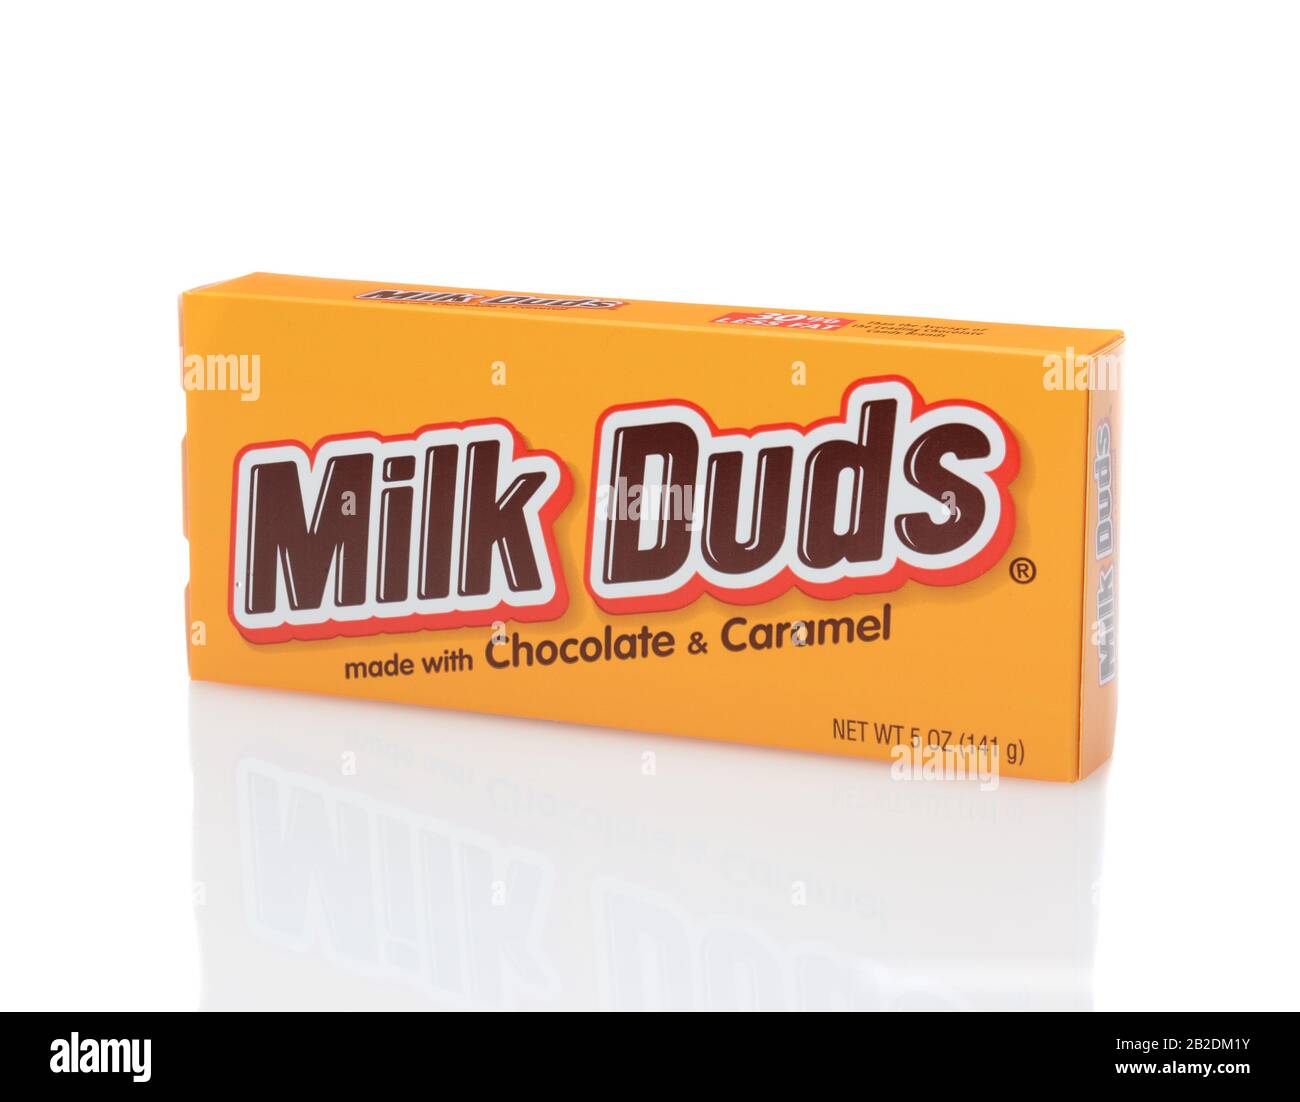 IRVINE, CALIFORNIA - DECEMBER 12, 2014: A box of Milk Duds Candy. Manufactured by the Hershey Company, the chewy caramel and chocolate candies are a p Stock Photo